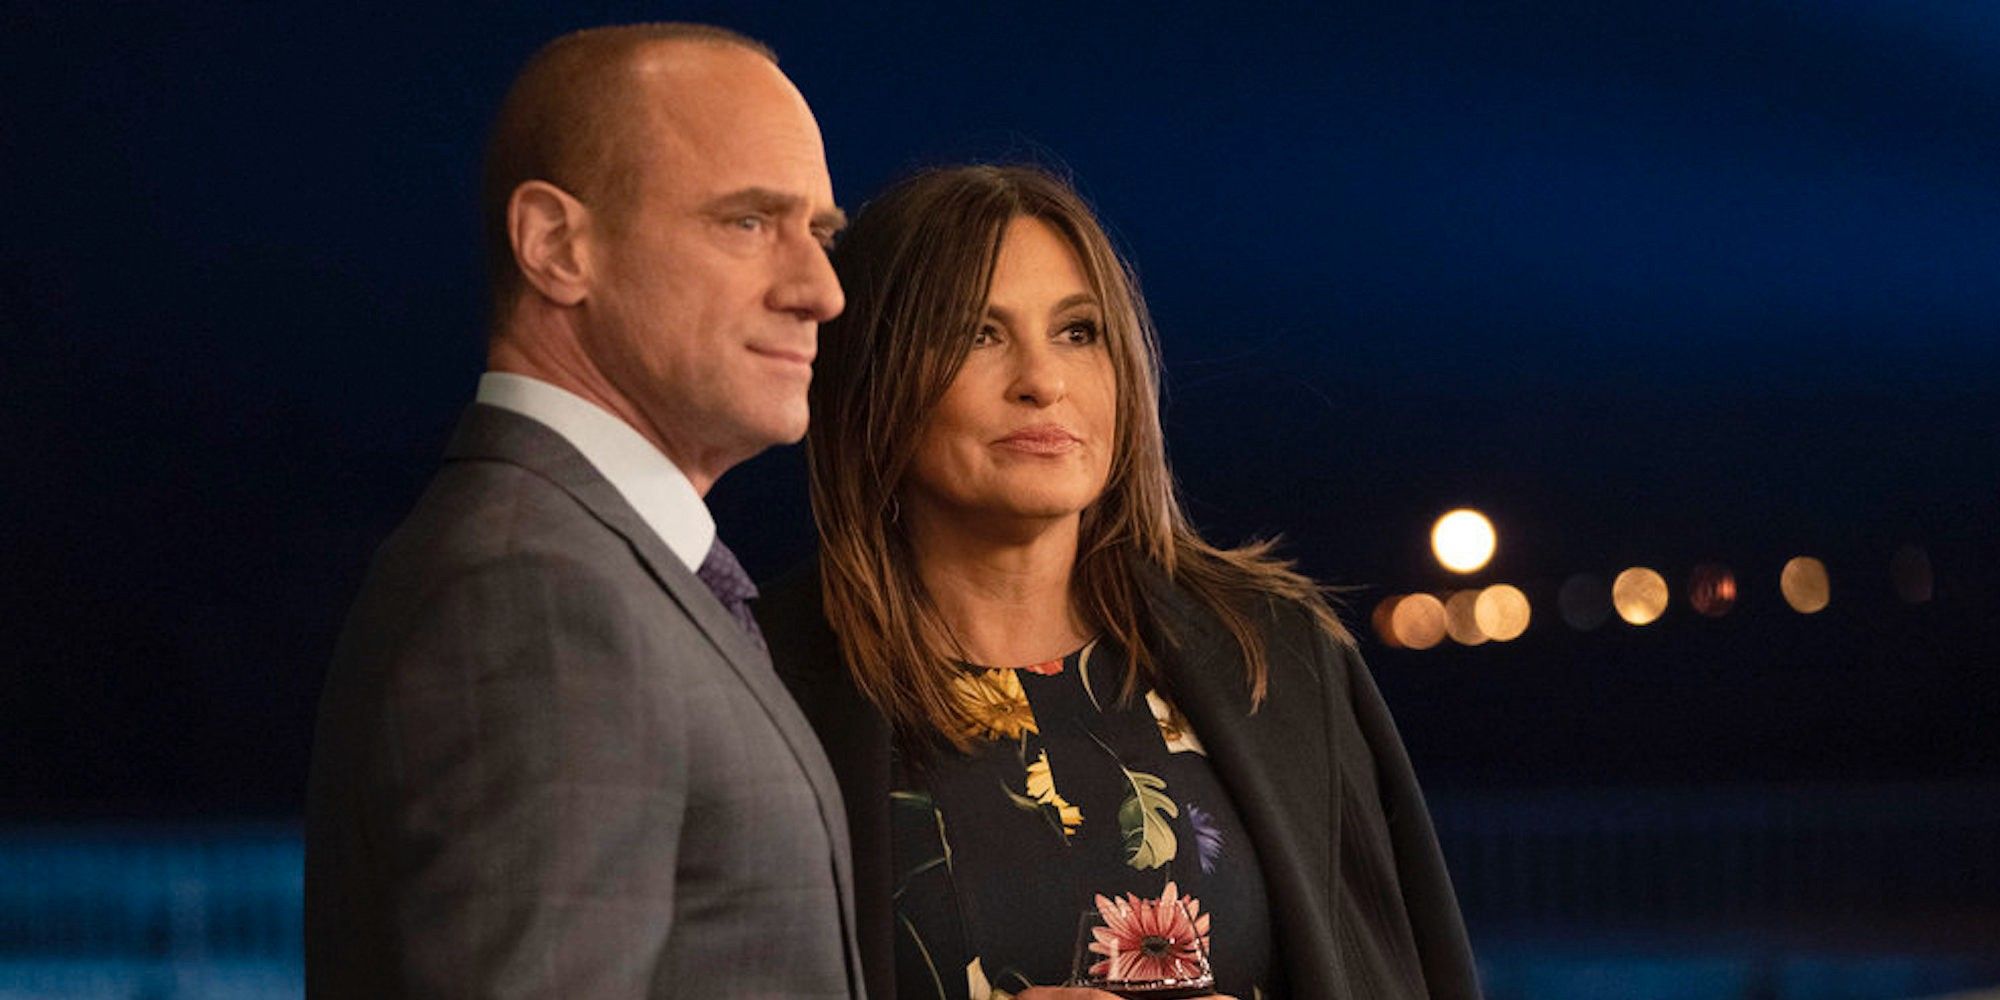 Law & Order Creator Weighs In On Benson & Stabler Romantic Relationship